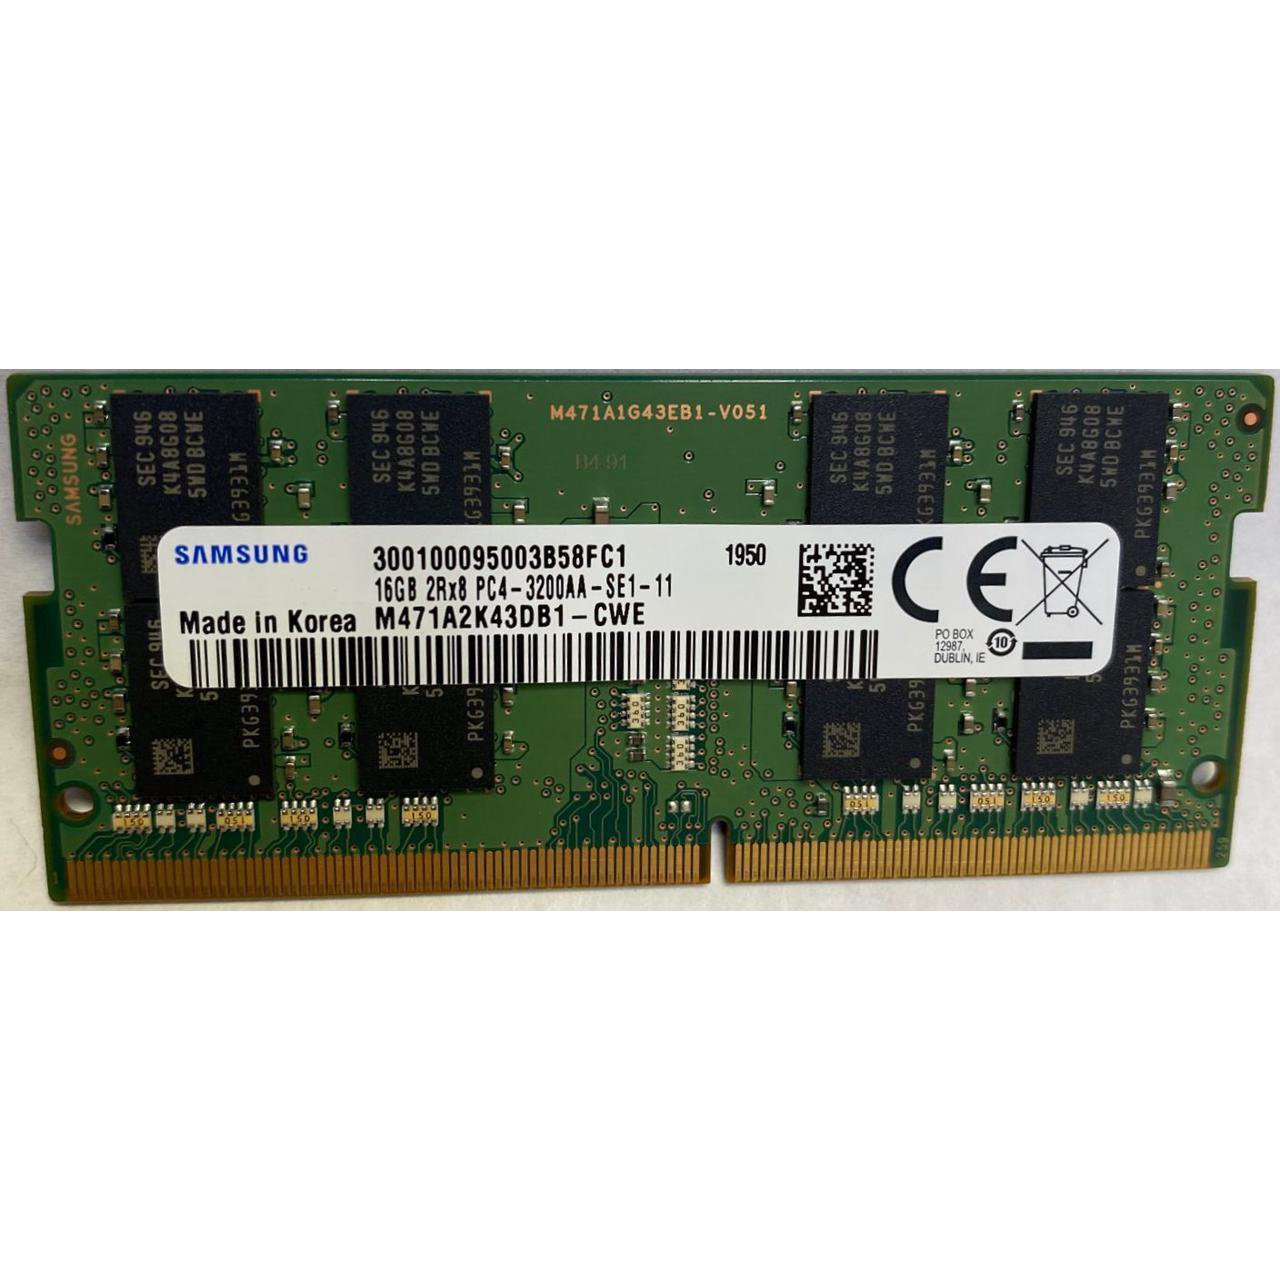 DDR4 4GB PC3200 SAMSUNG FOR NOTEBOOK ,Laptop RAM